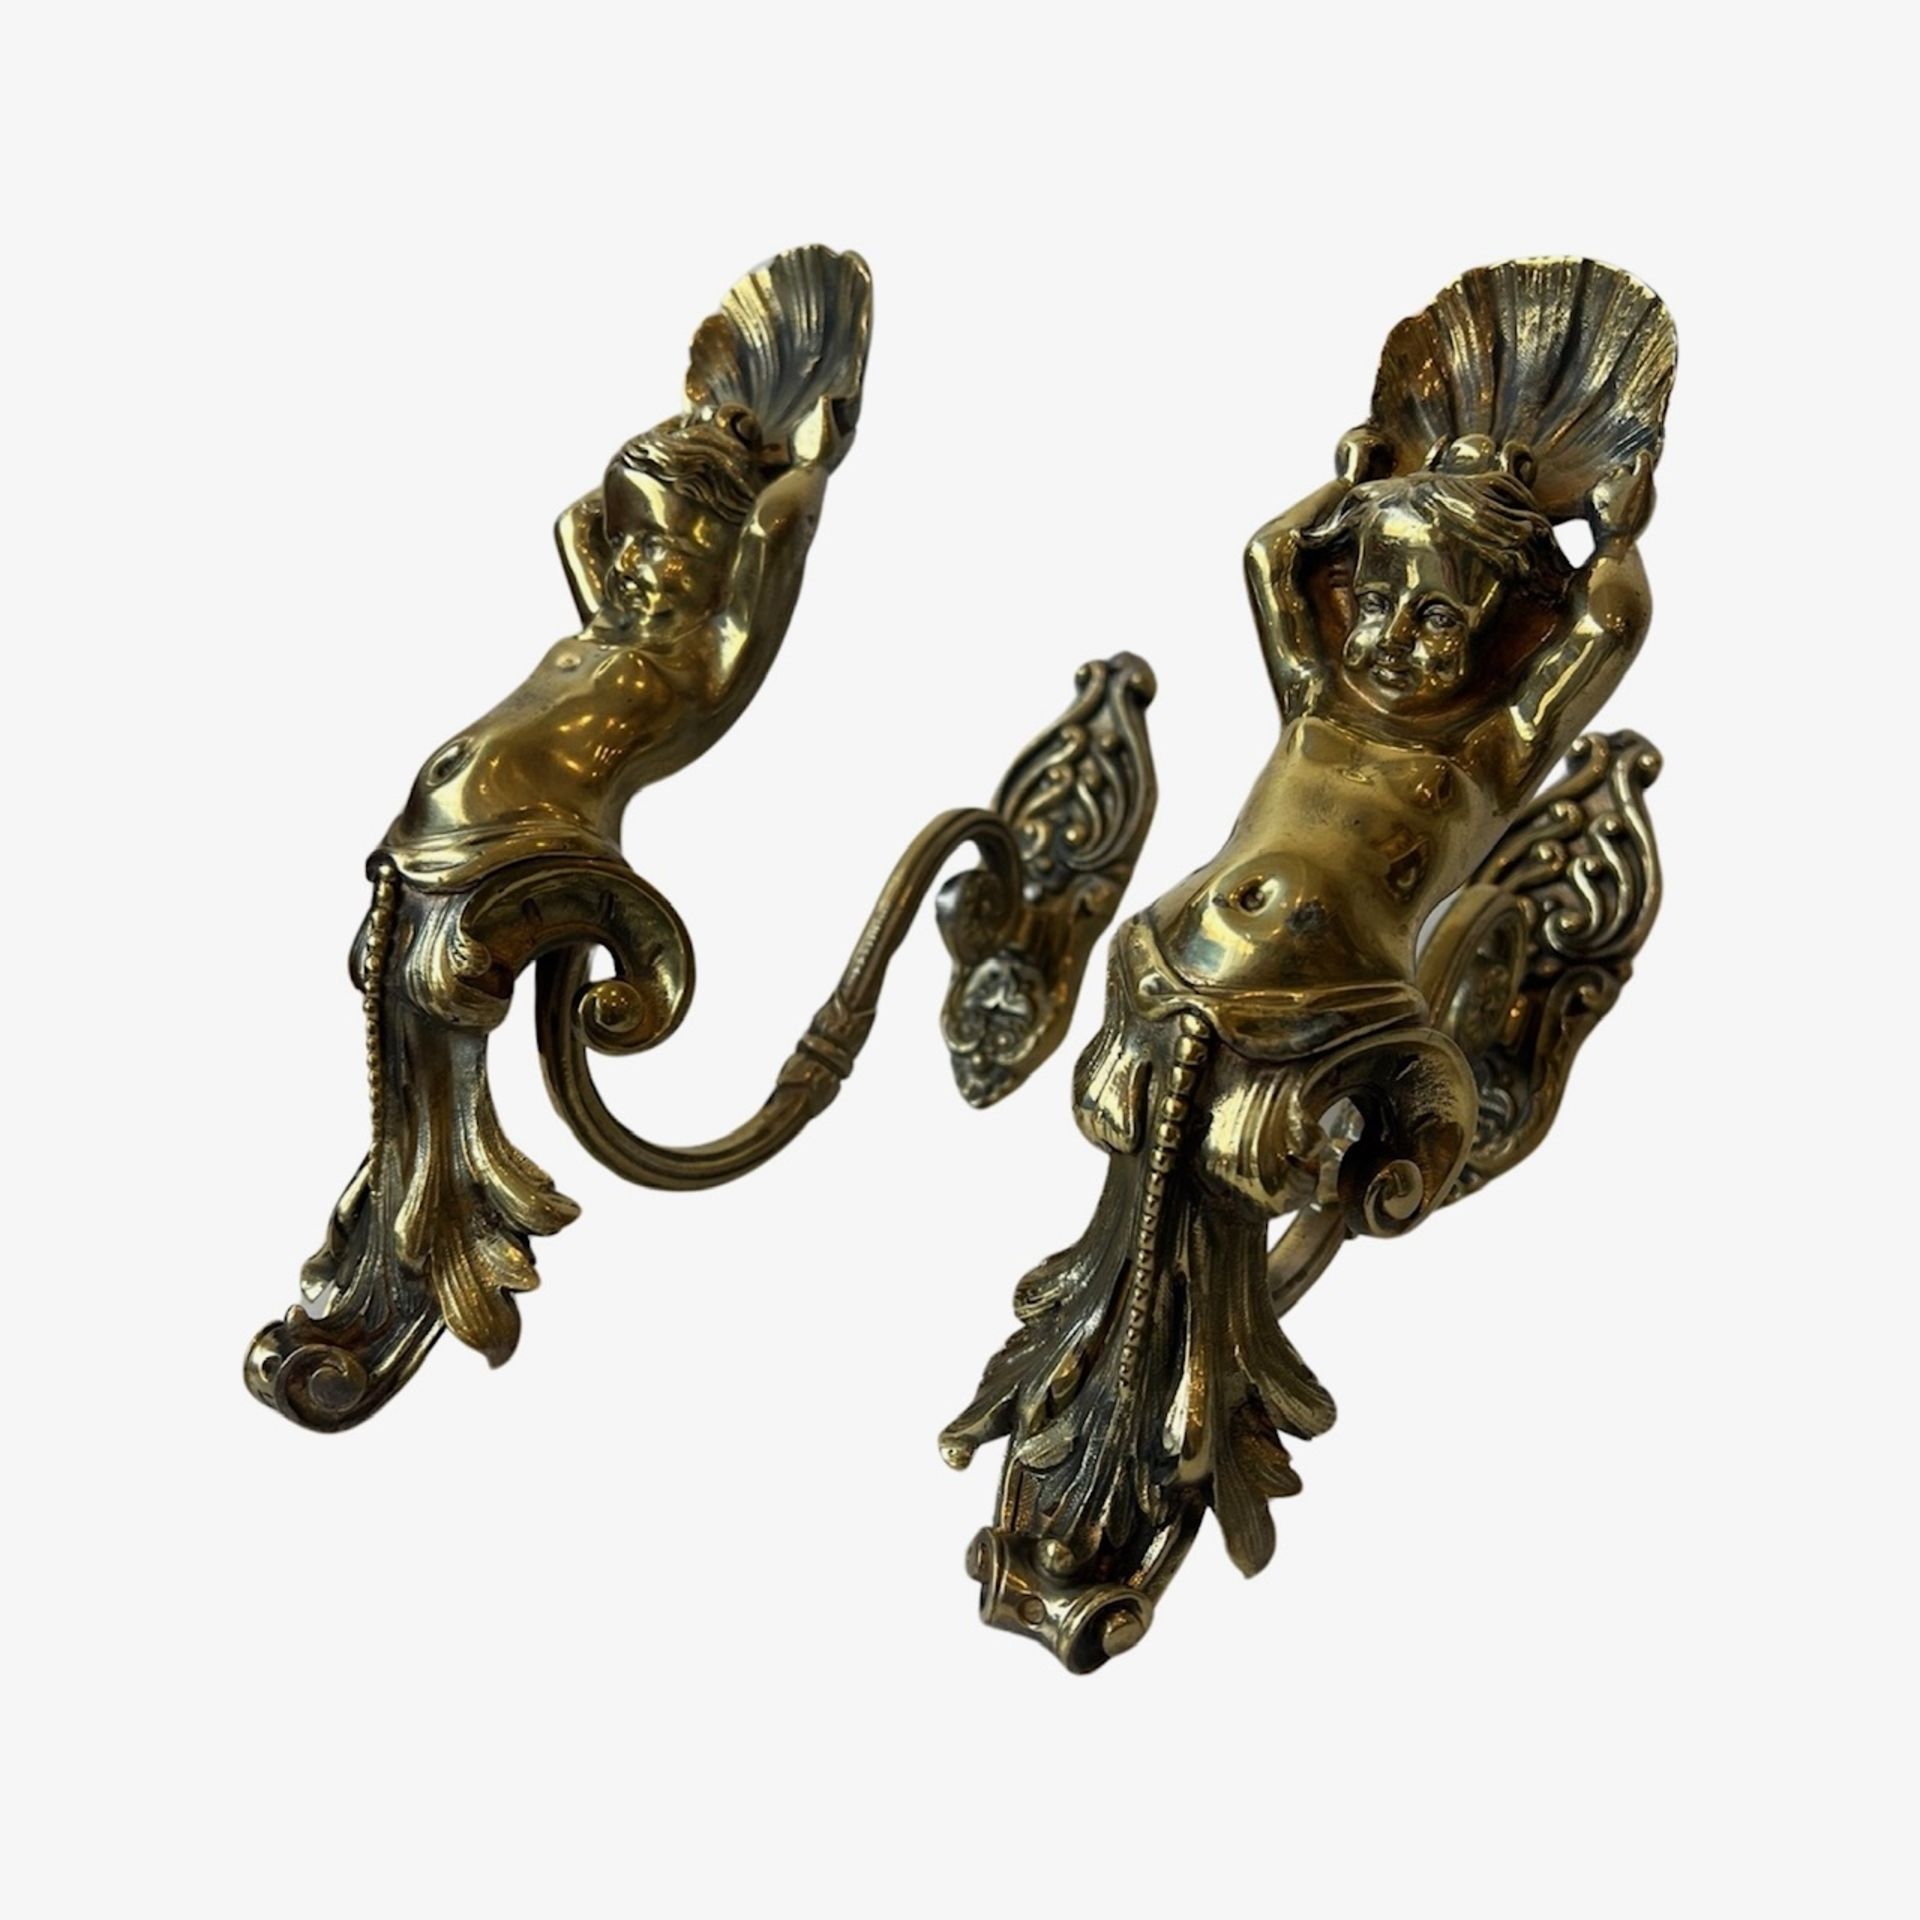 A PAIR OF LATE 19TH CENTURY FRENCH BRONZE CURTAIN TIE BACKS - Image 3 of 7